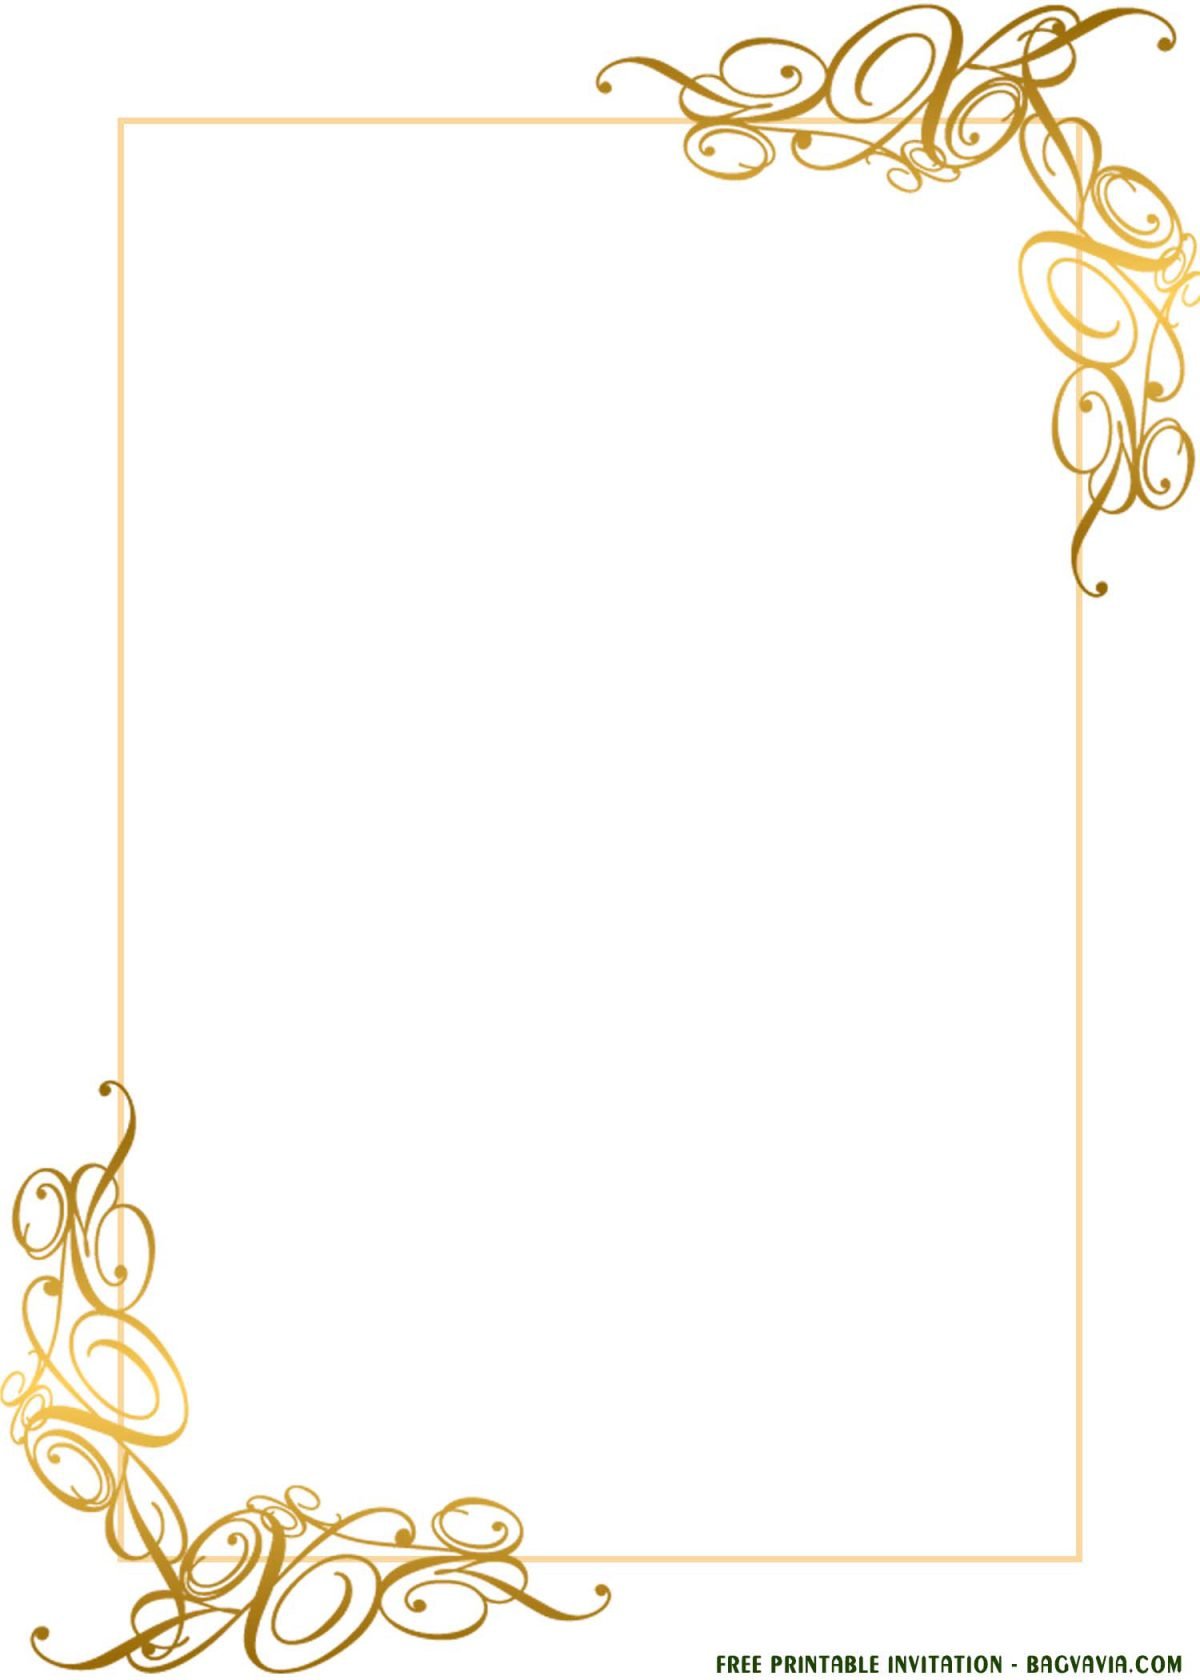 (FREE Printable) Gold Lace Invitation Templates For Any Occasions